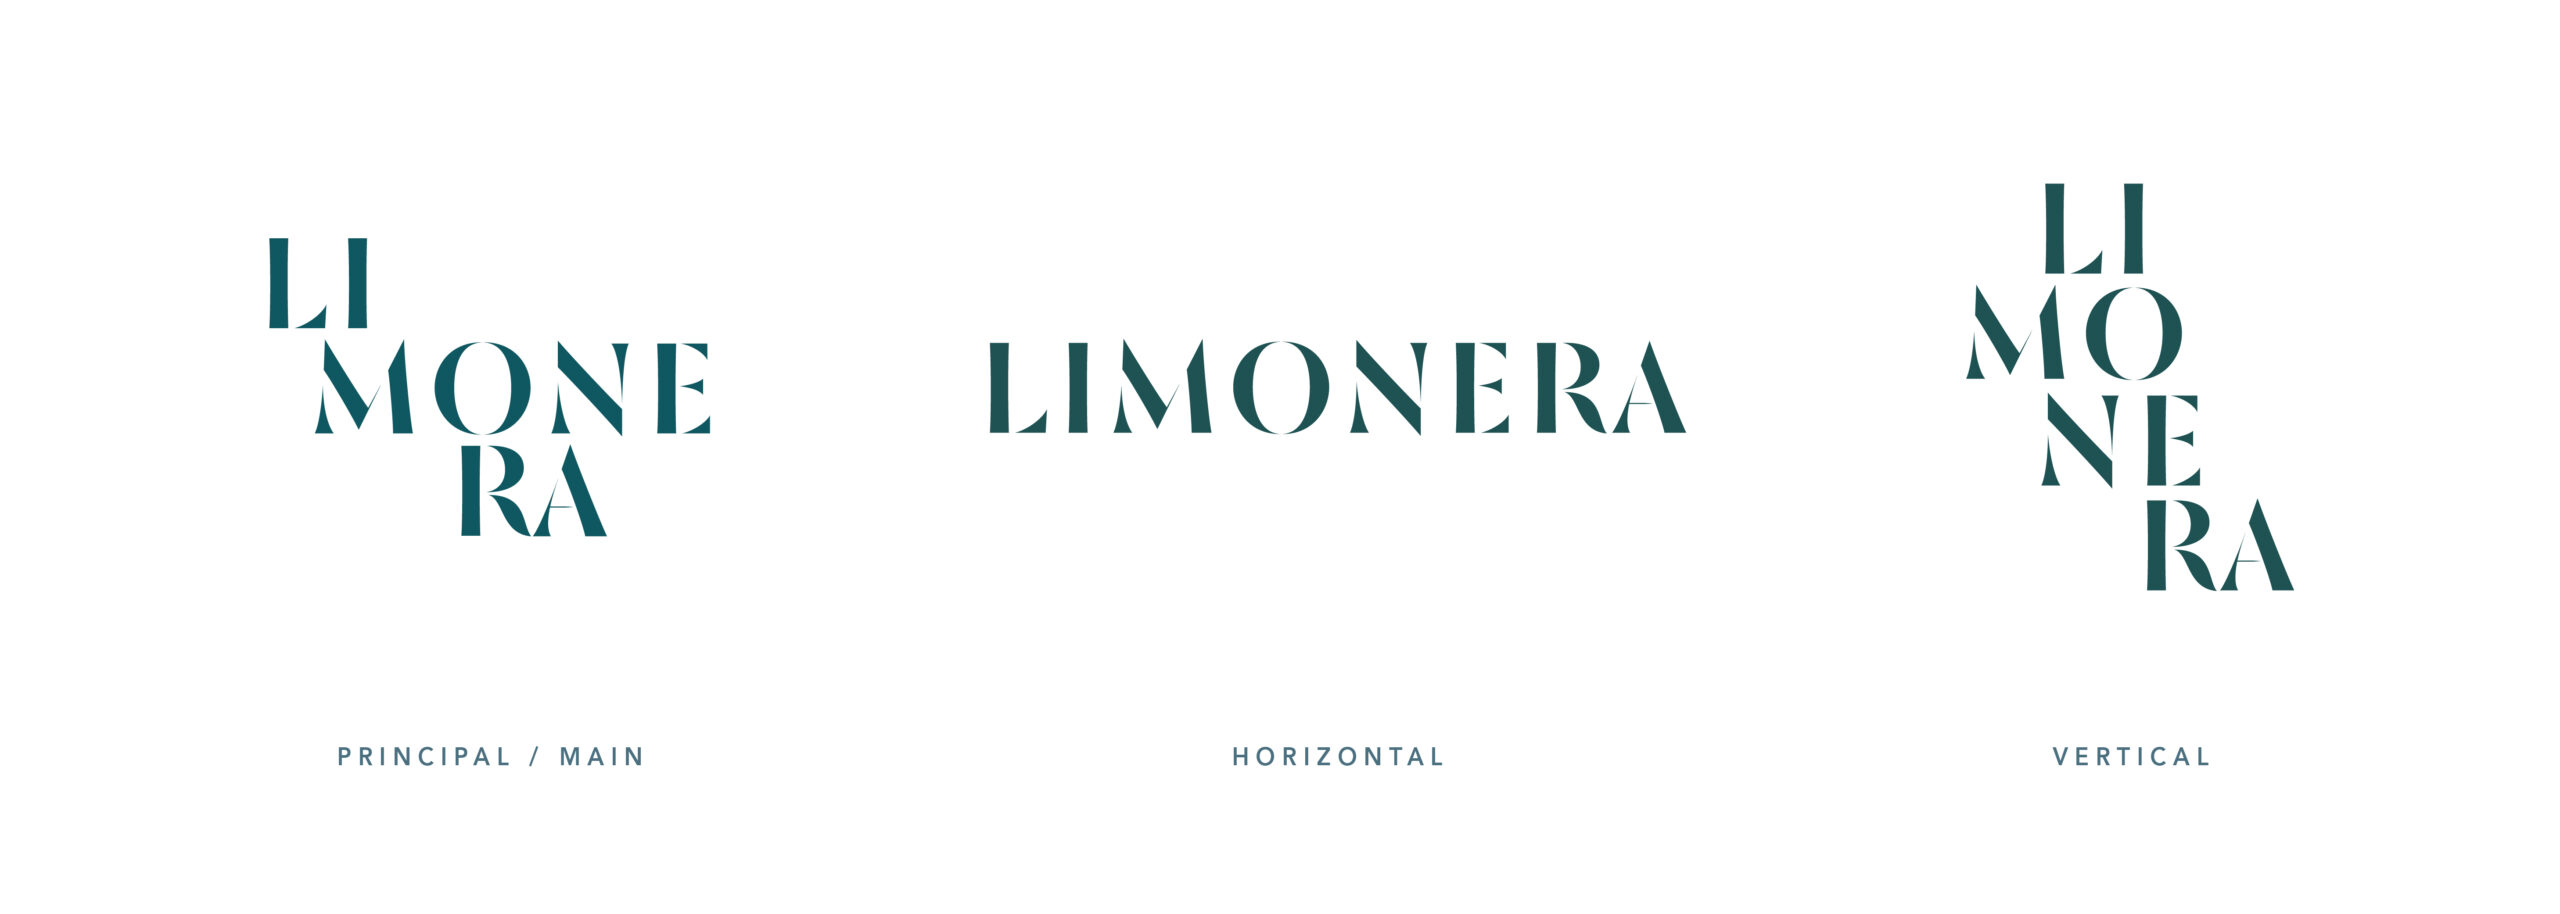 Exploring the Fresh and Natural Design of Limonera Canned Caipivodka